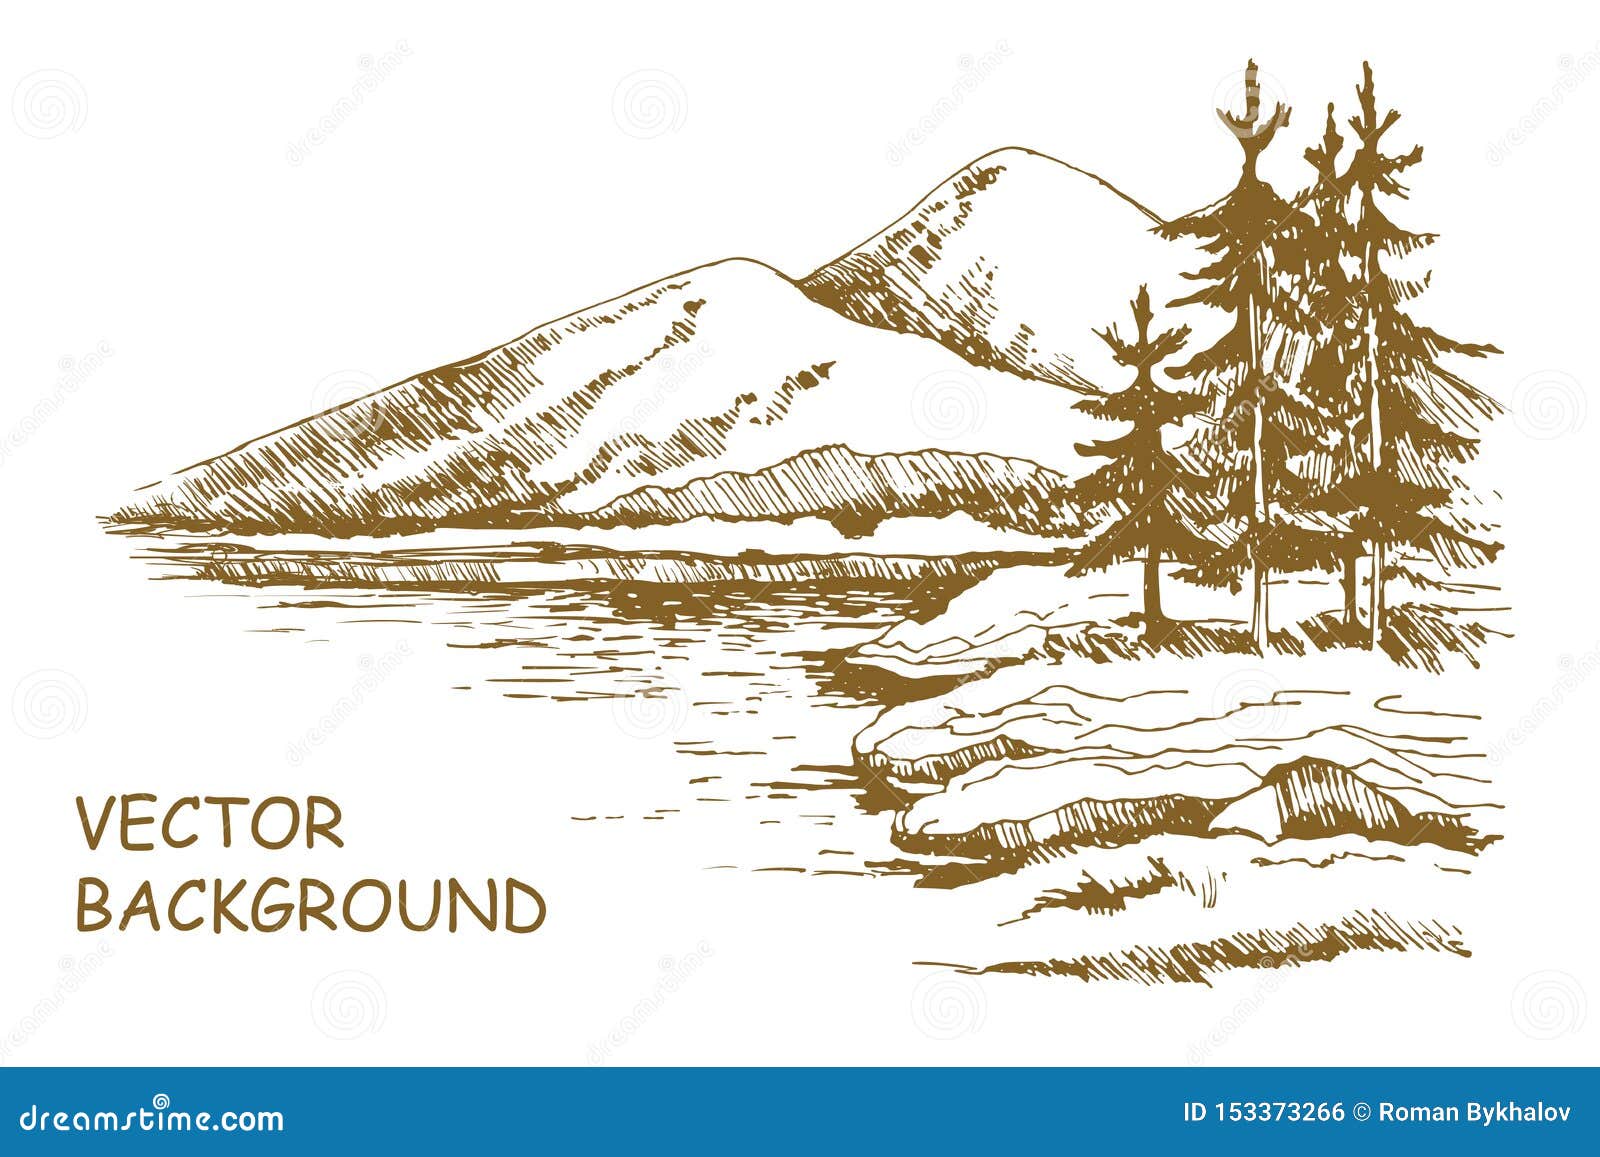 479 Mountain Sketch Valley Stock Photos  Free  RoyaltyFree Stock Photos  from Dreamstime